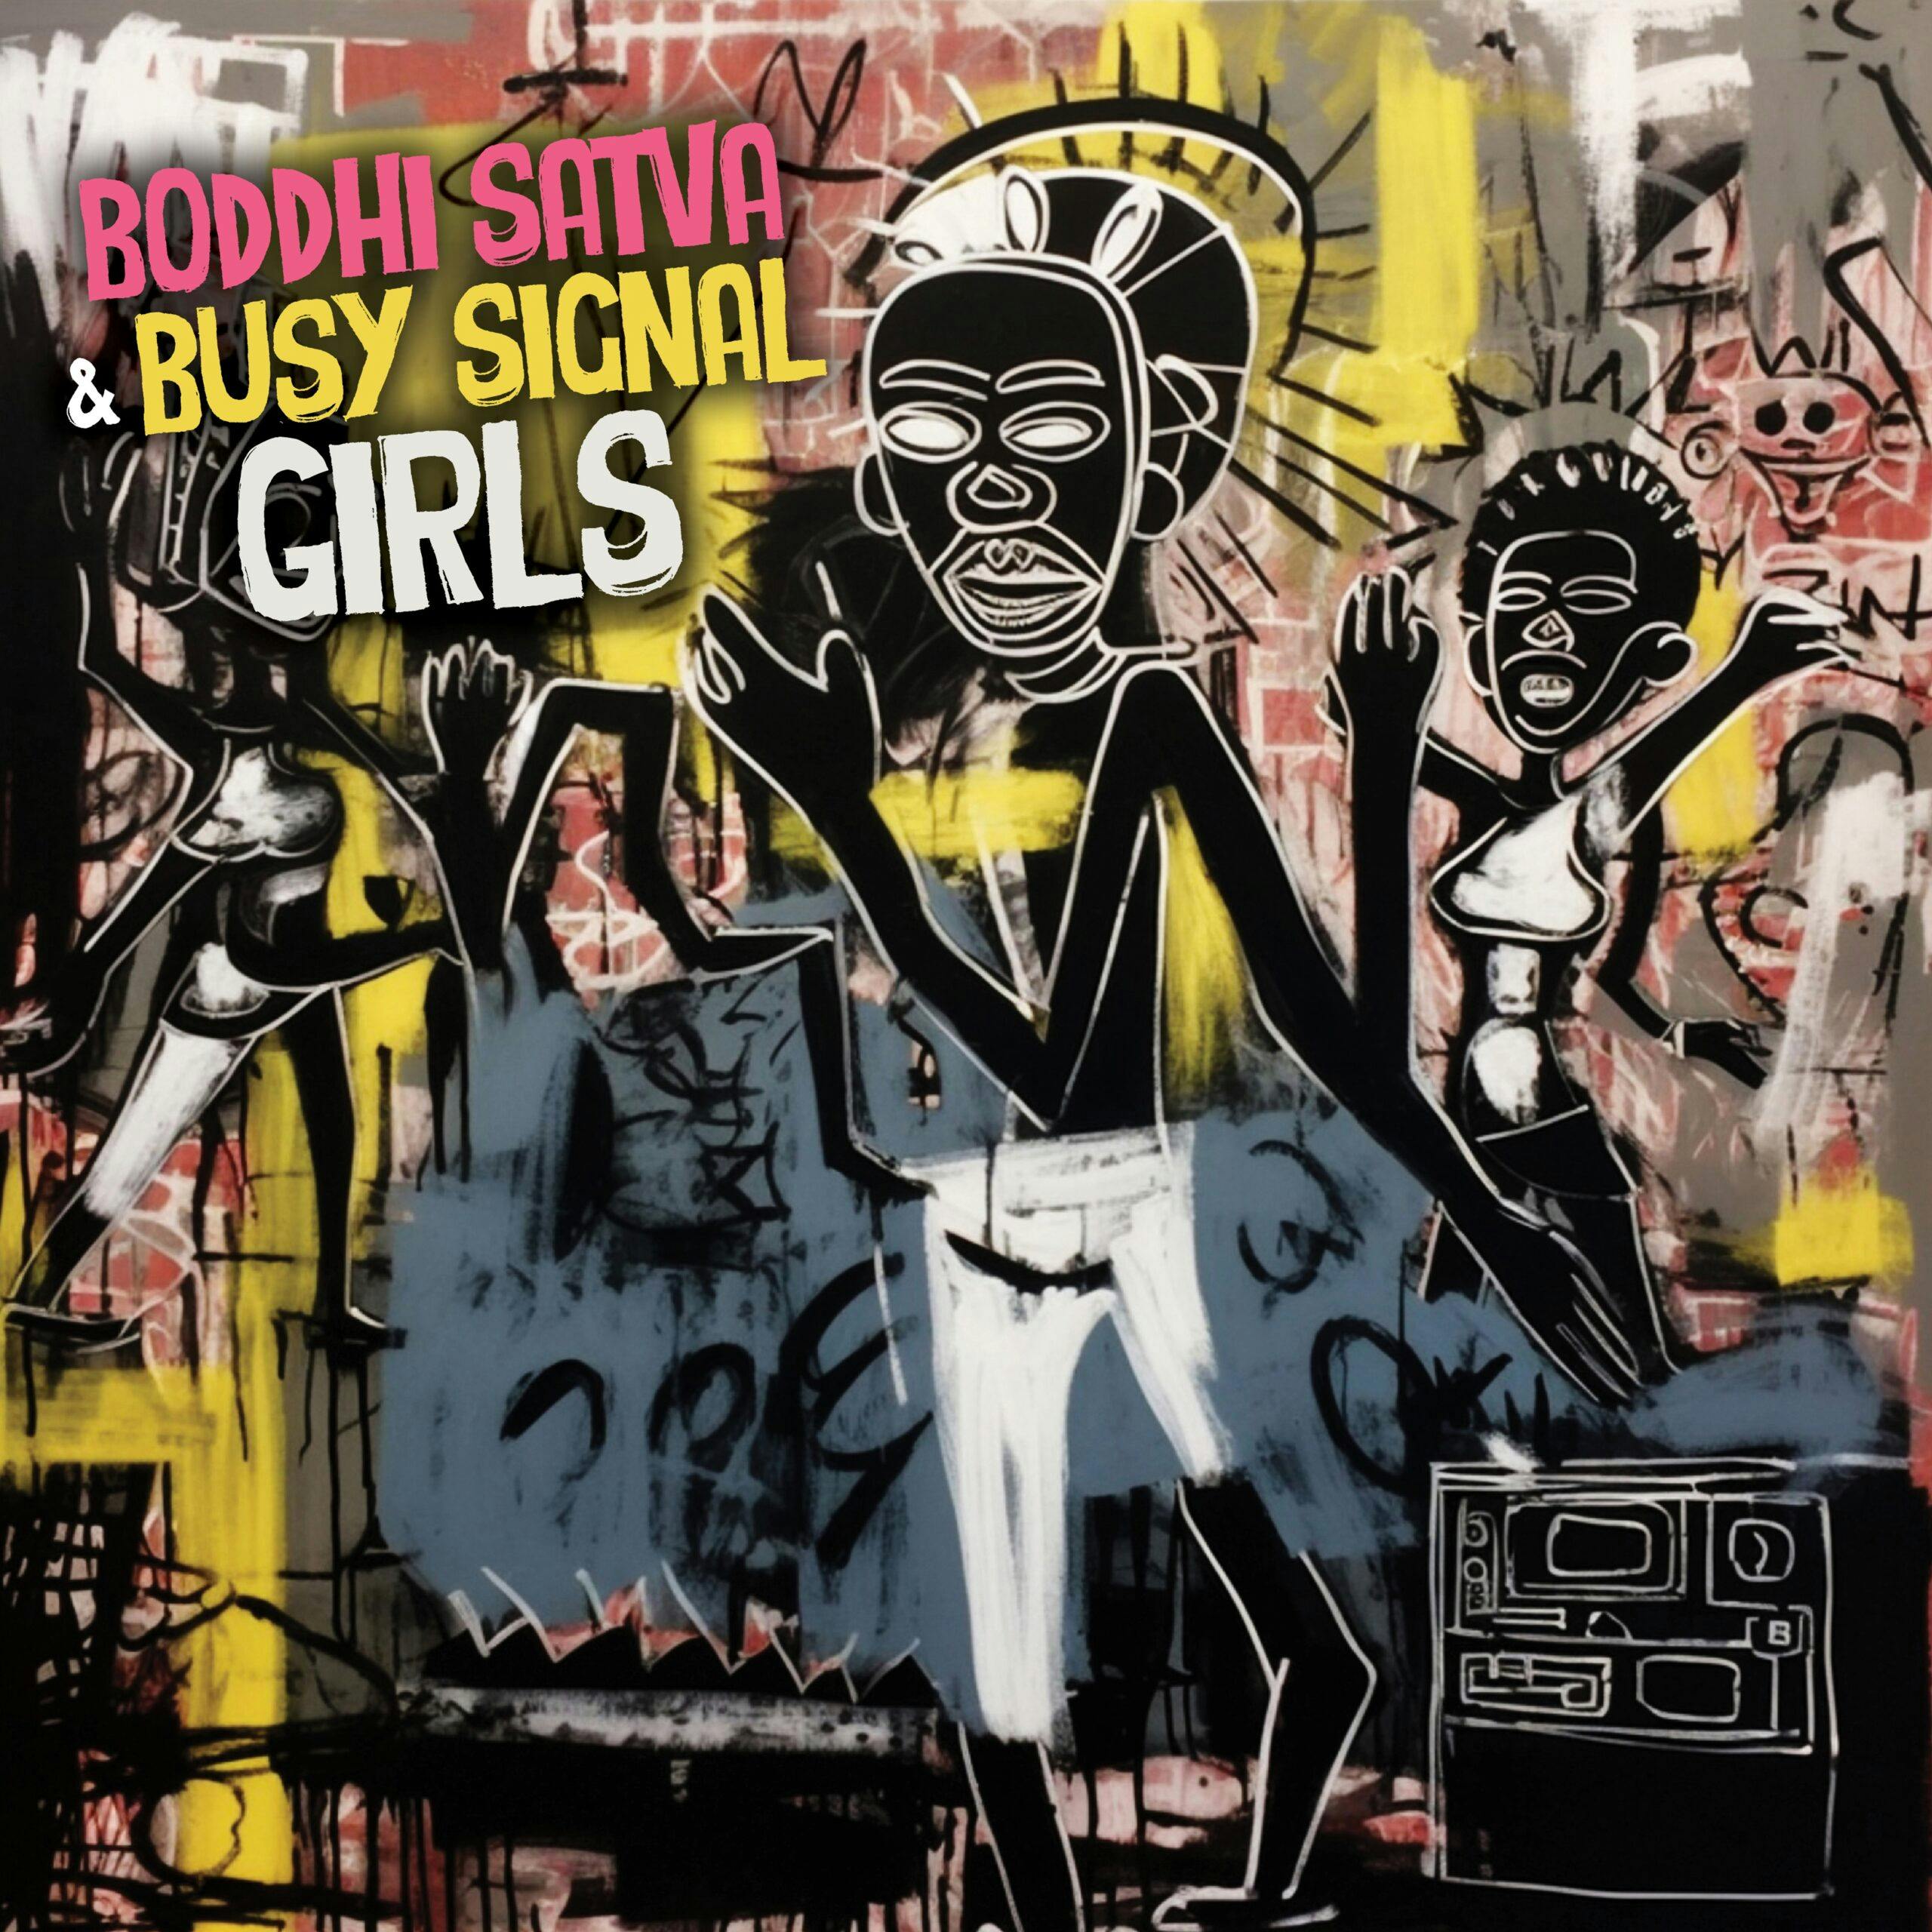 Get ready for an electrifying collaboration between the trailblazing Ancestral Soul pioneer, Boddhi Satva, and the dancehall legend, Busy Signal.